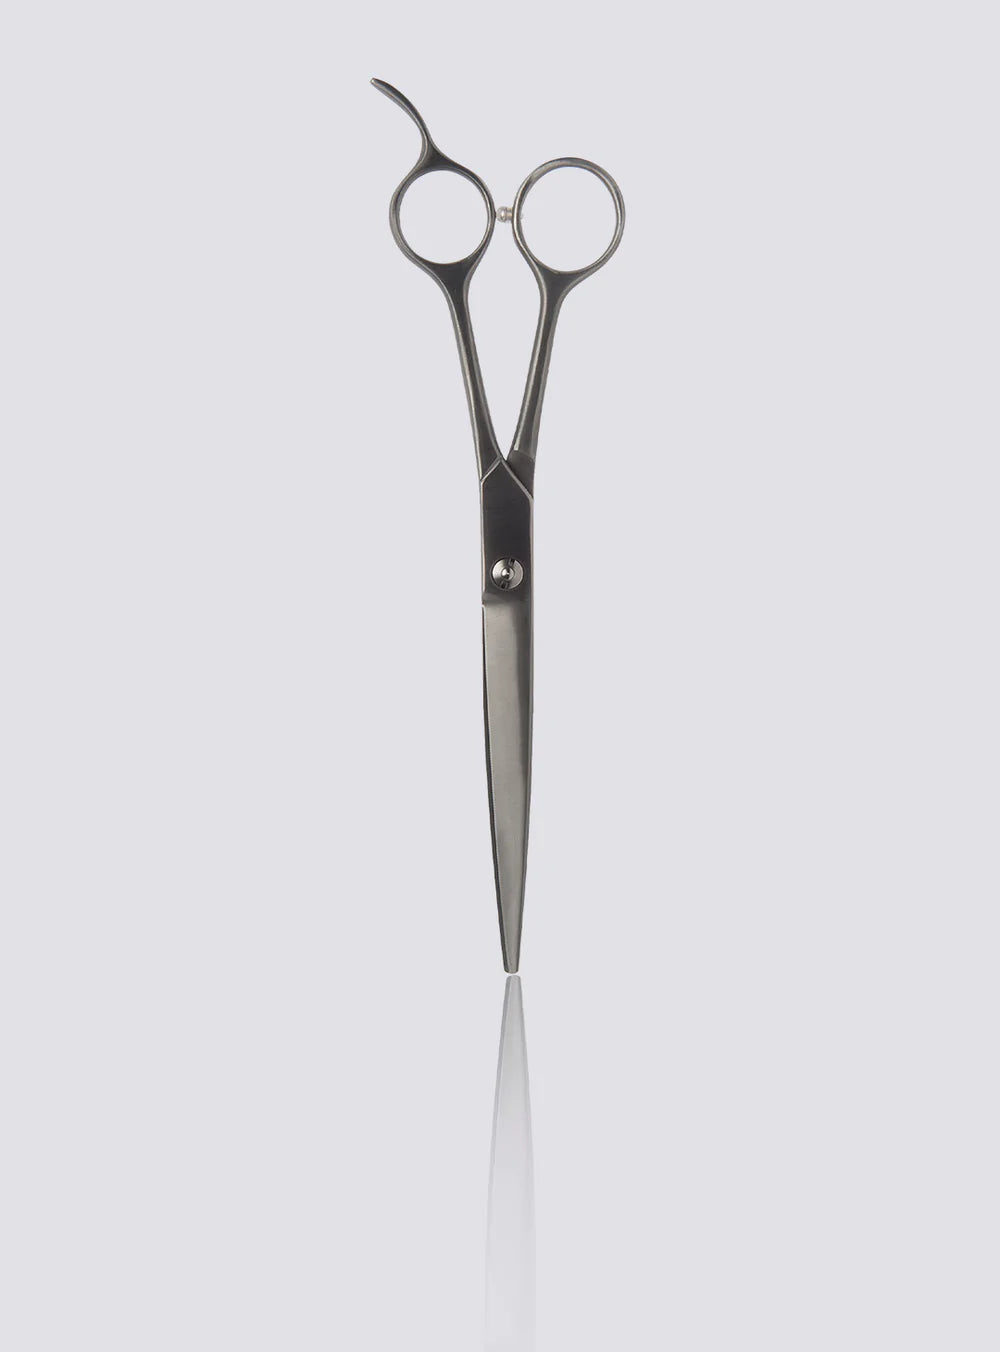 Fromm Invent 7.25" Barber Shear